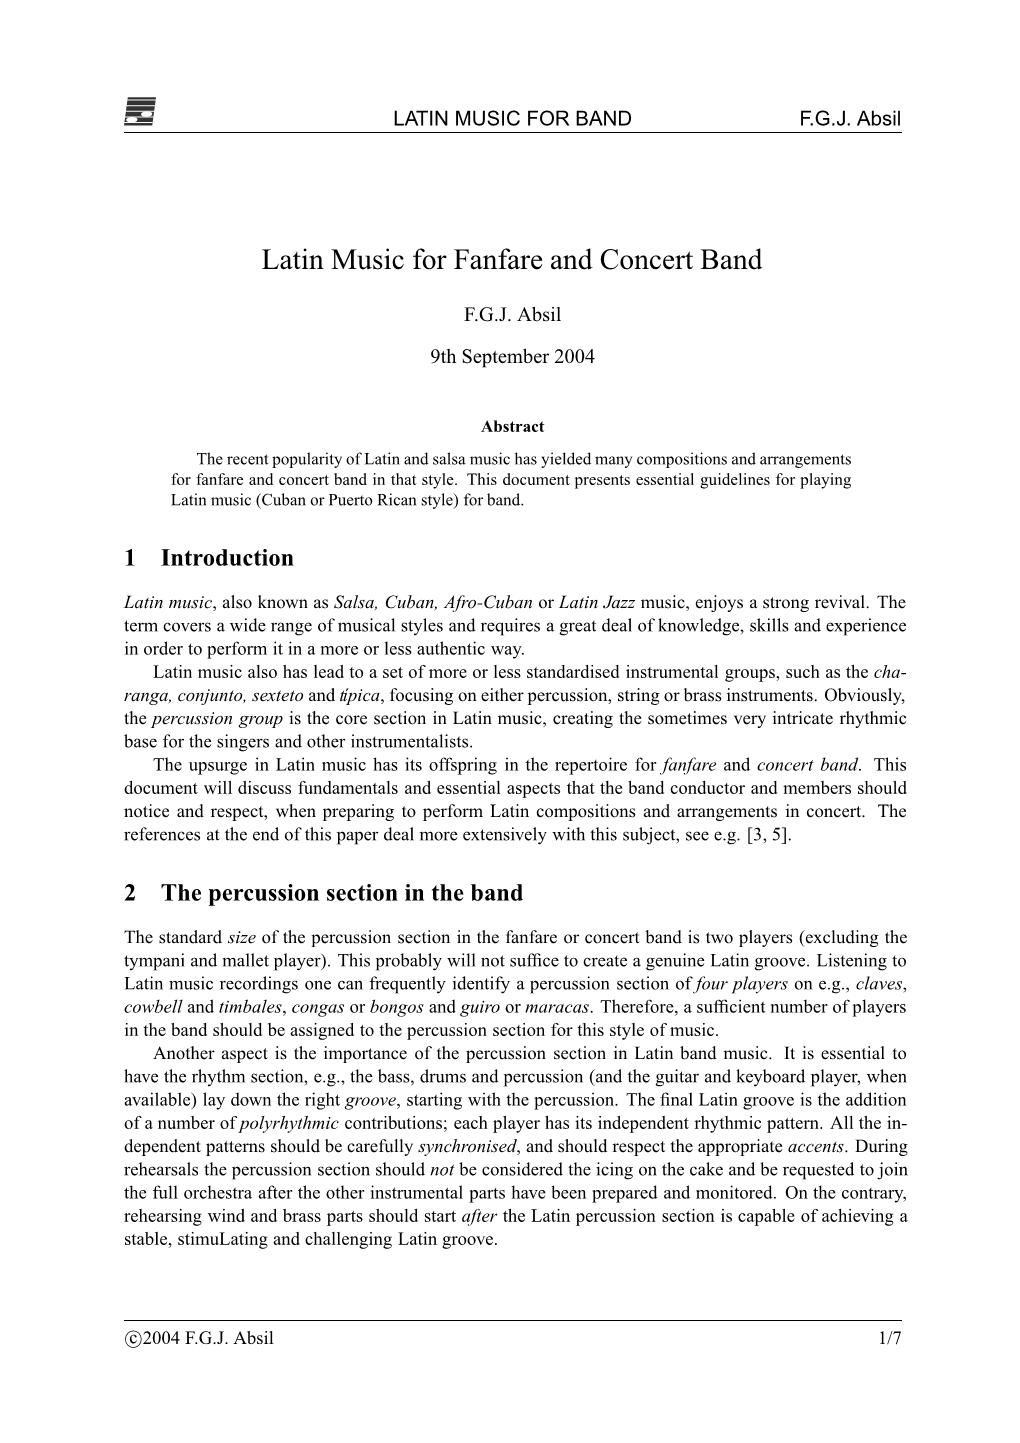 Latin Music for Fanfare and Concert Band